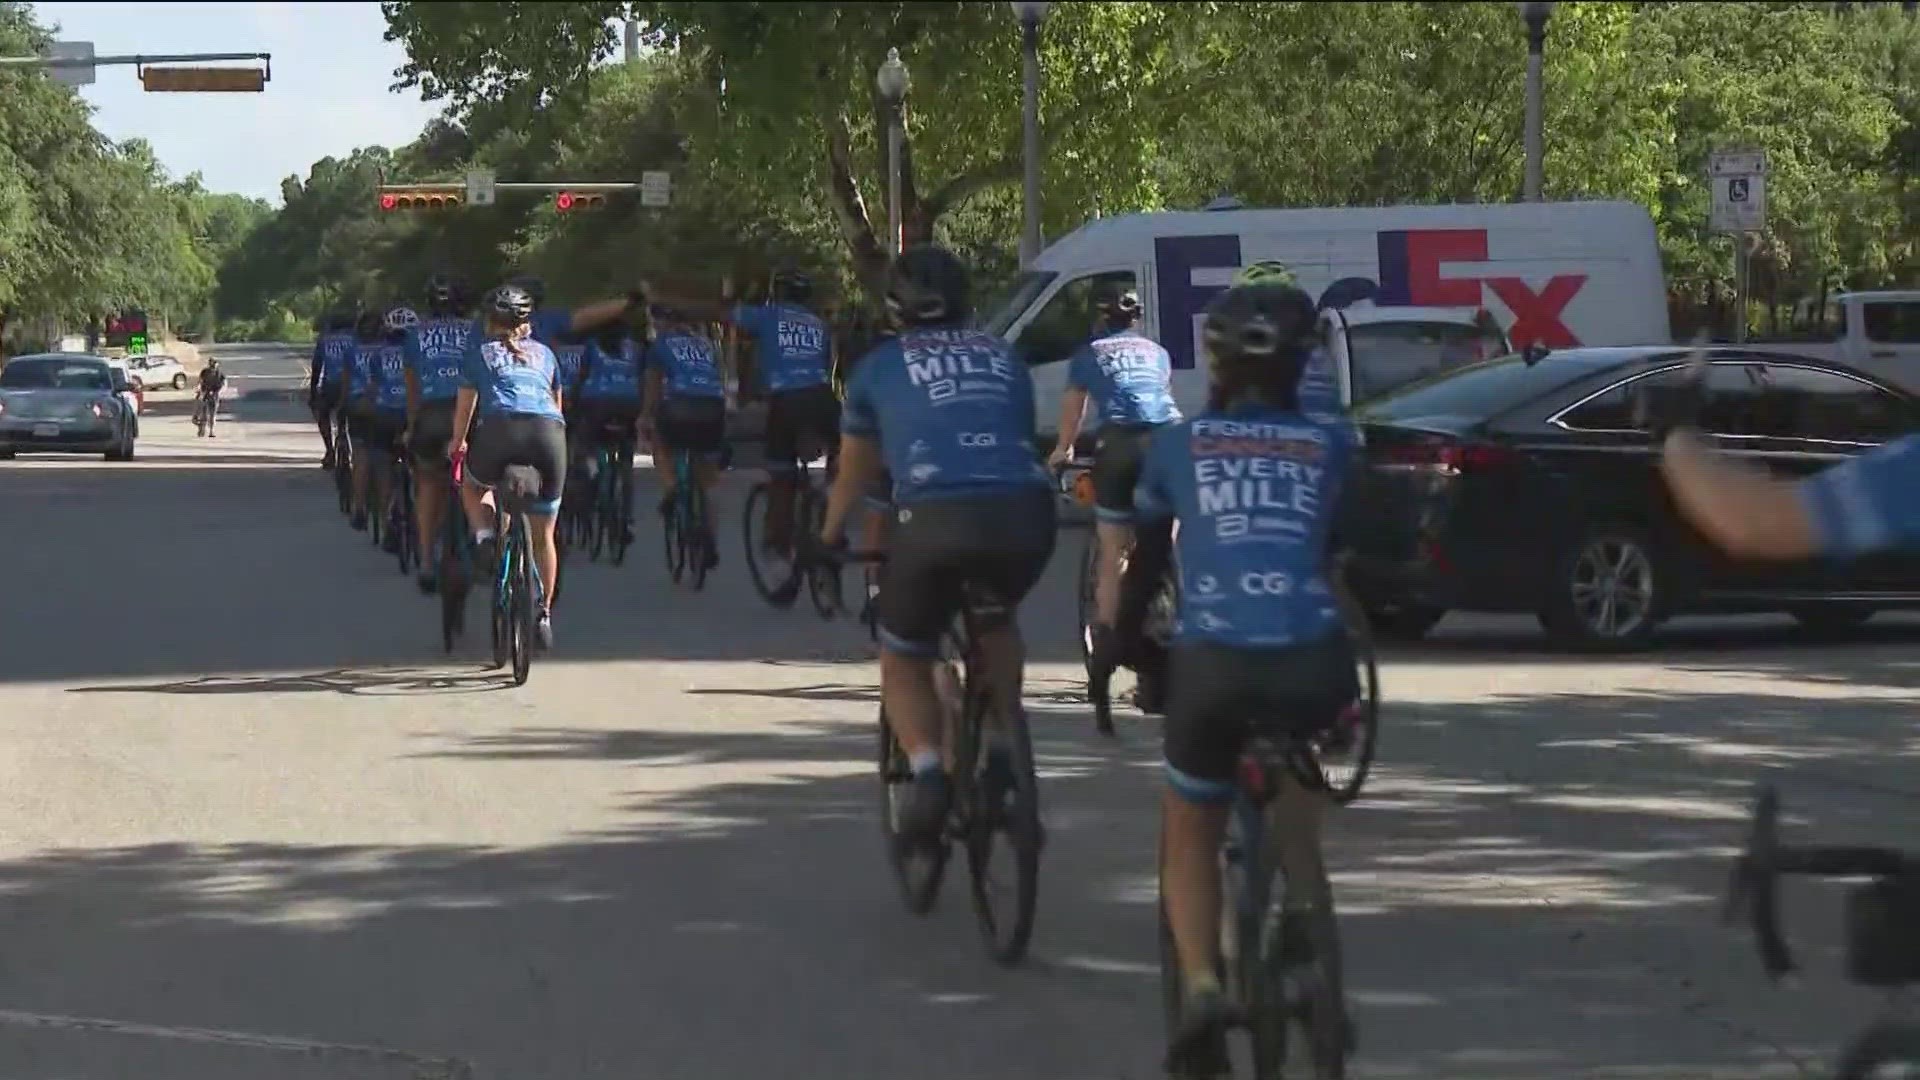 The charity bike ride is designed to raise awareness for cancer.